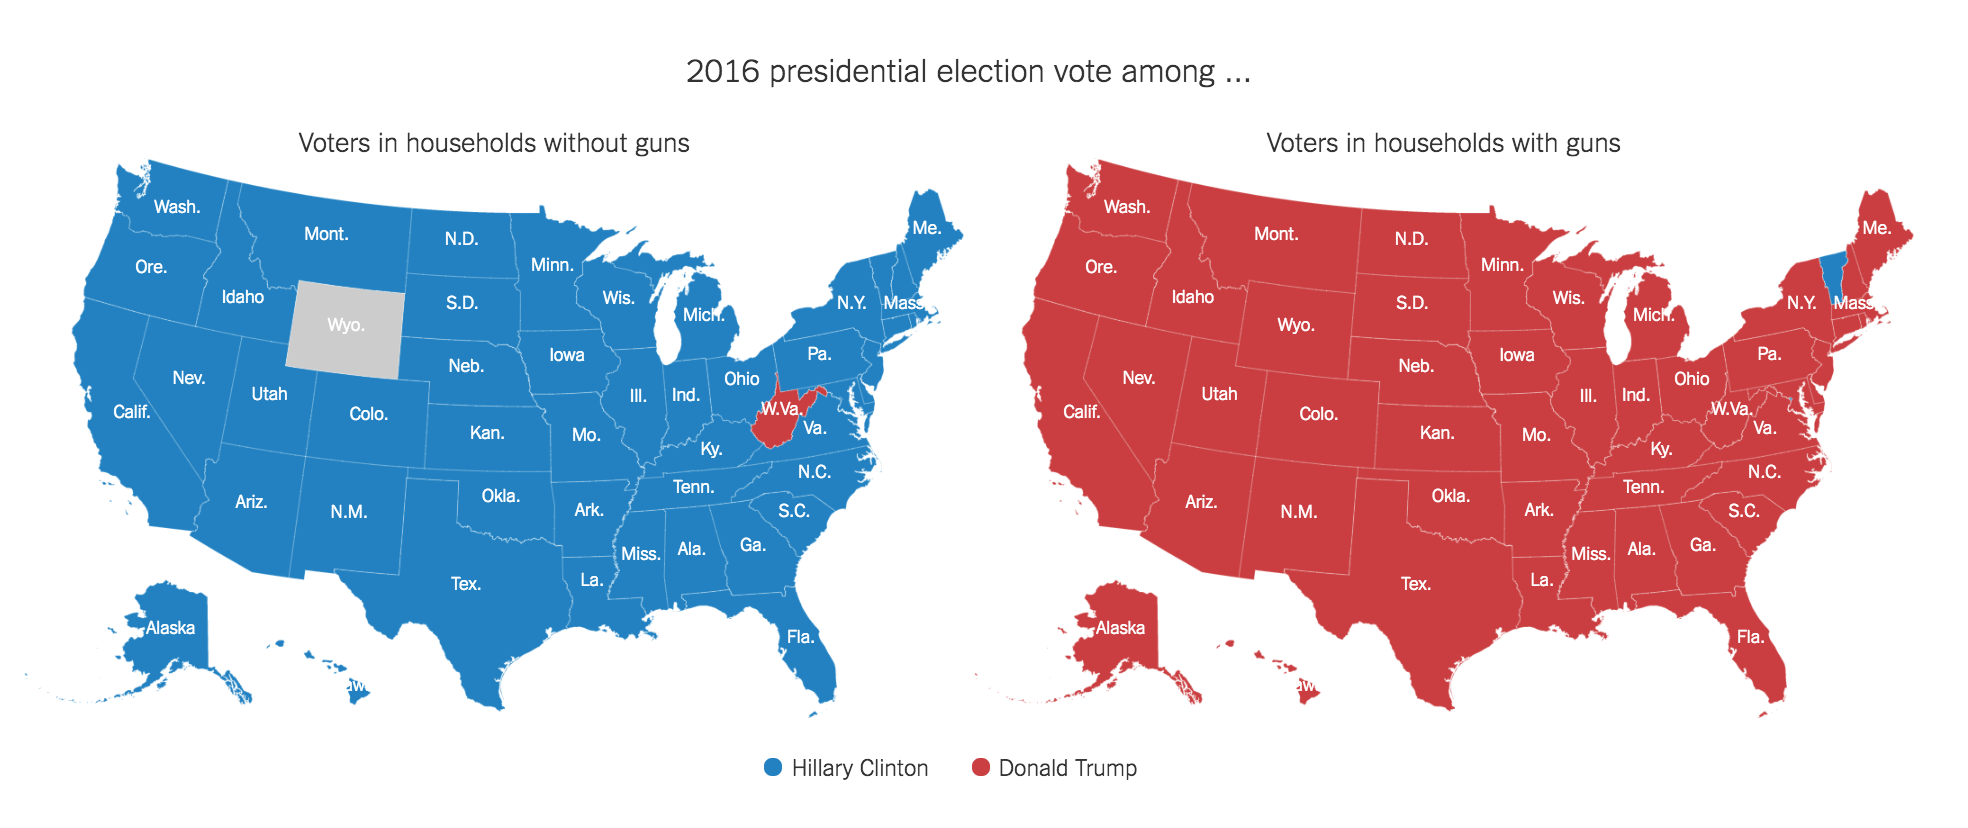 Clinton voters and guns; Trump voters and guns